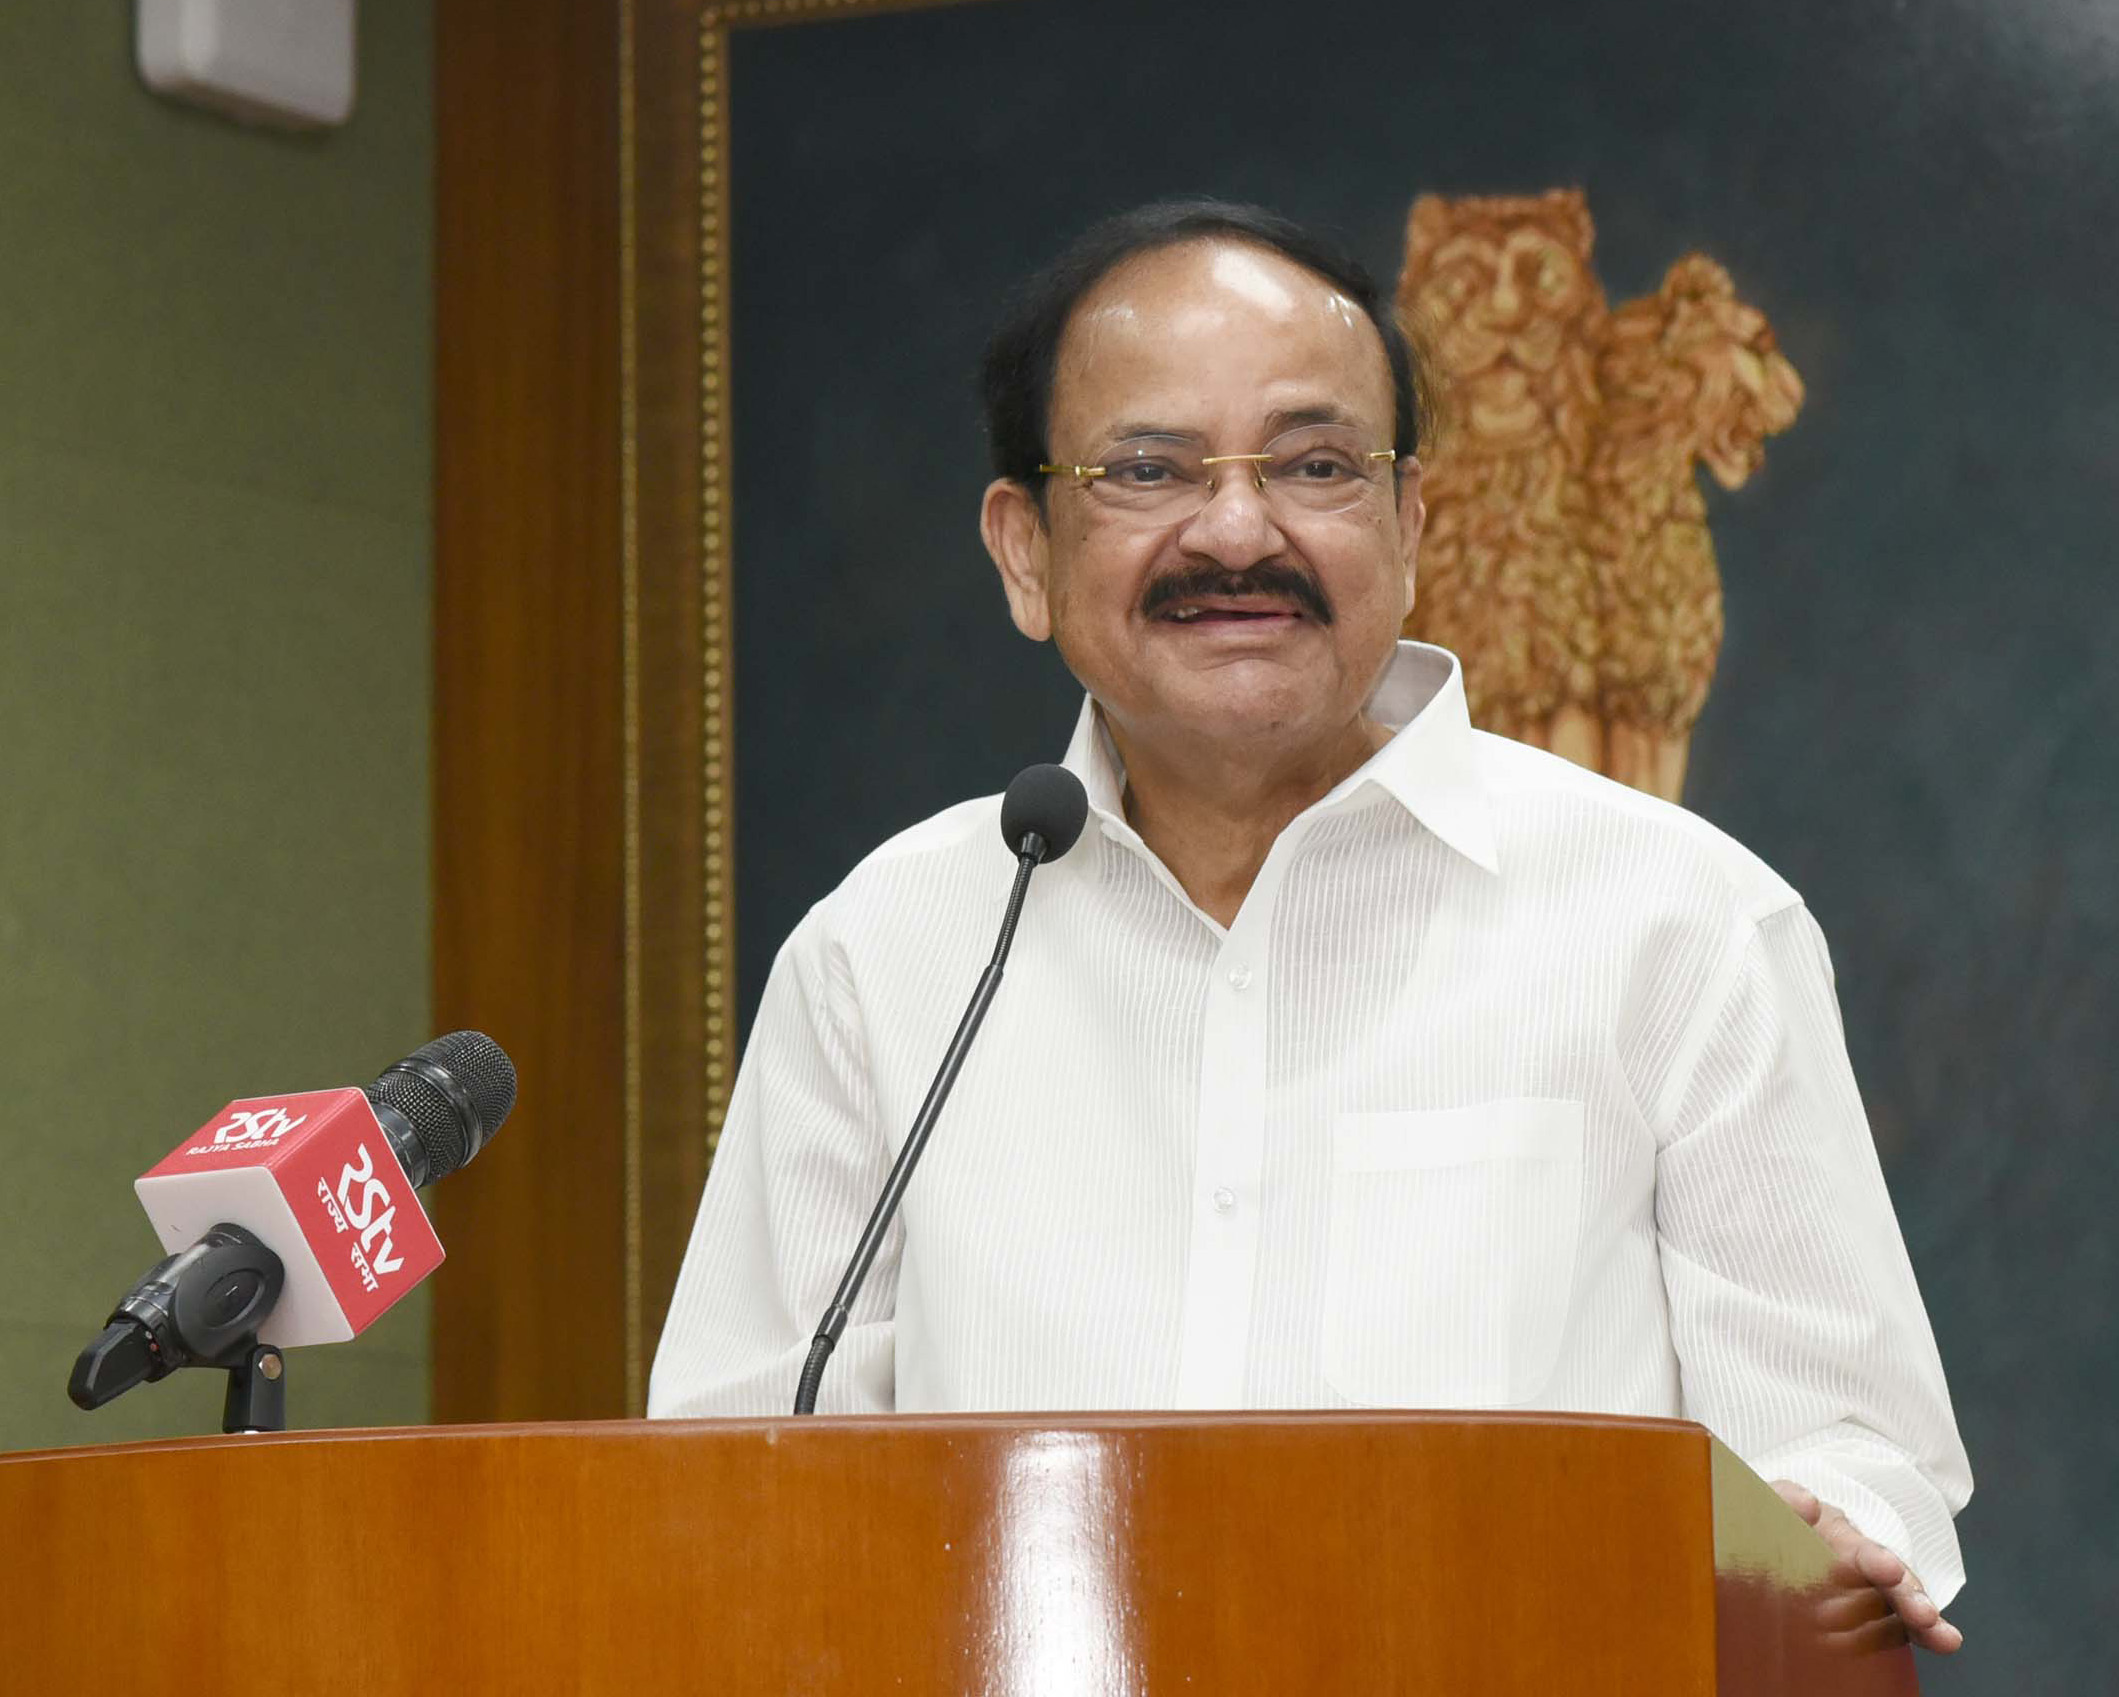 The Vice President,  M. Venkaiah Naidu addressing the gathering after releasing the Coffee Table Book titled 'Glorious Diaspora - Pride of India', containing brief profiles of recipients of Pravasi Bharatiya Samman Awards from 2003 to 2019, in New Delhi on